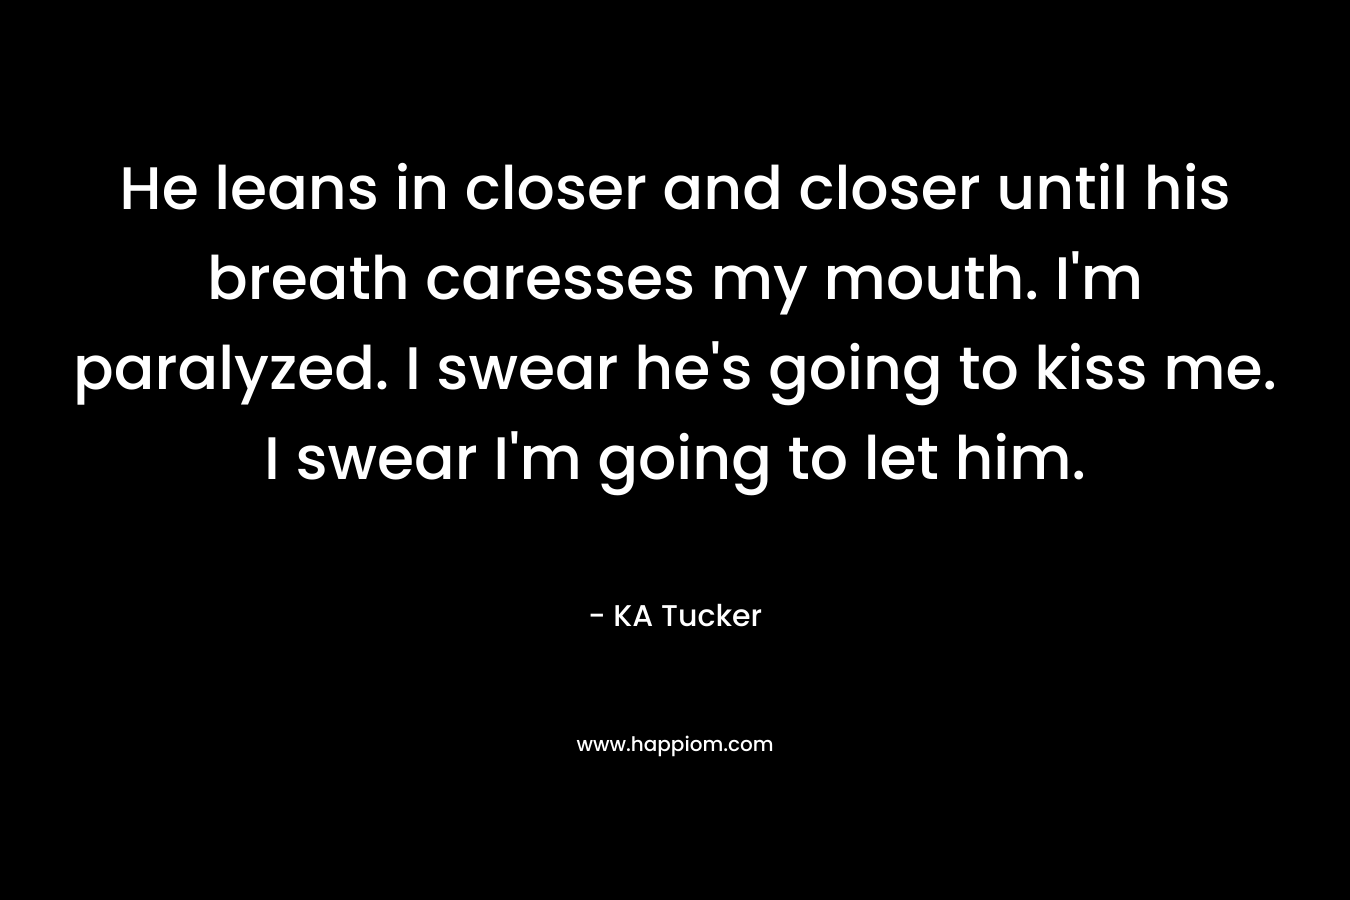 He leans in closer and closer until his breath caresses my mouth. I’m paralyzed. I swear he’s going to kiss me. I swear I’m going to let him. – KA Tucker